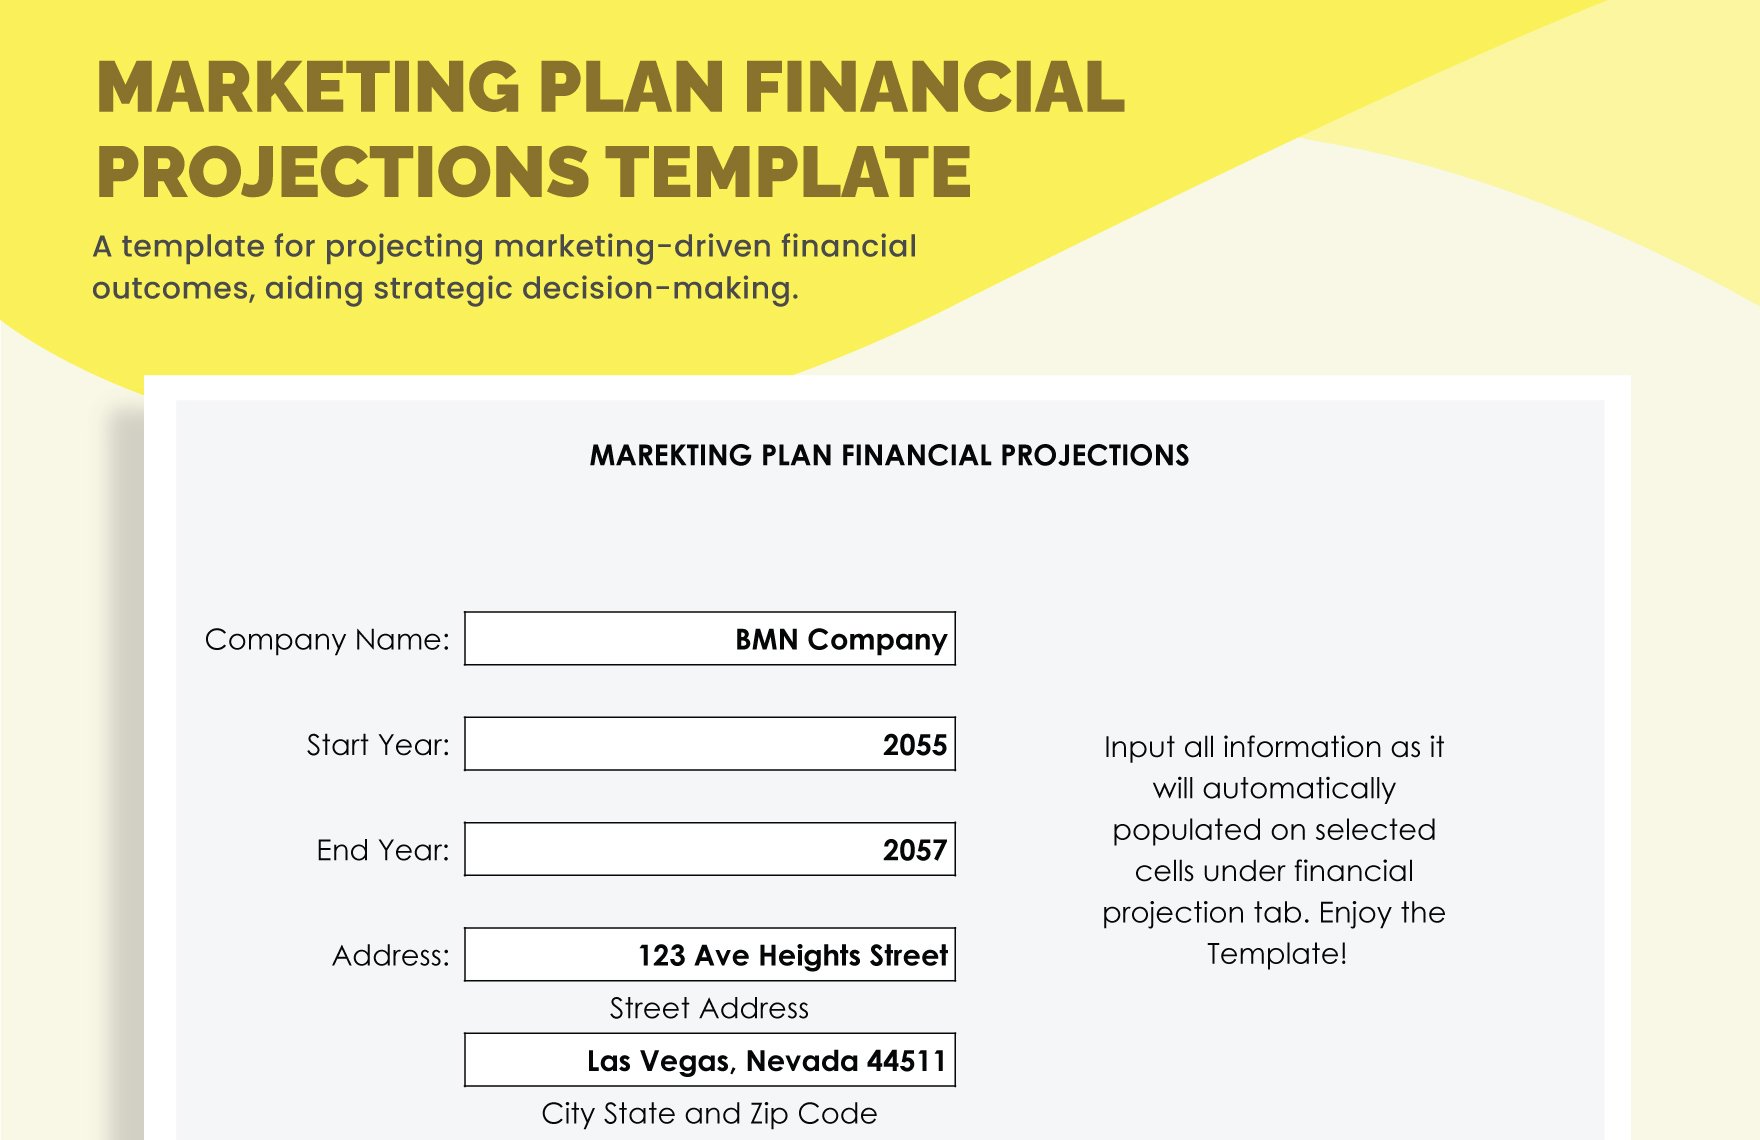 Marketing Plan Financial Projections Template